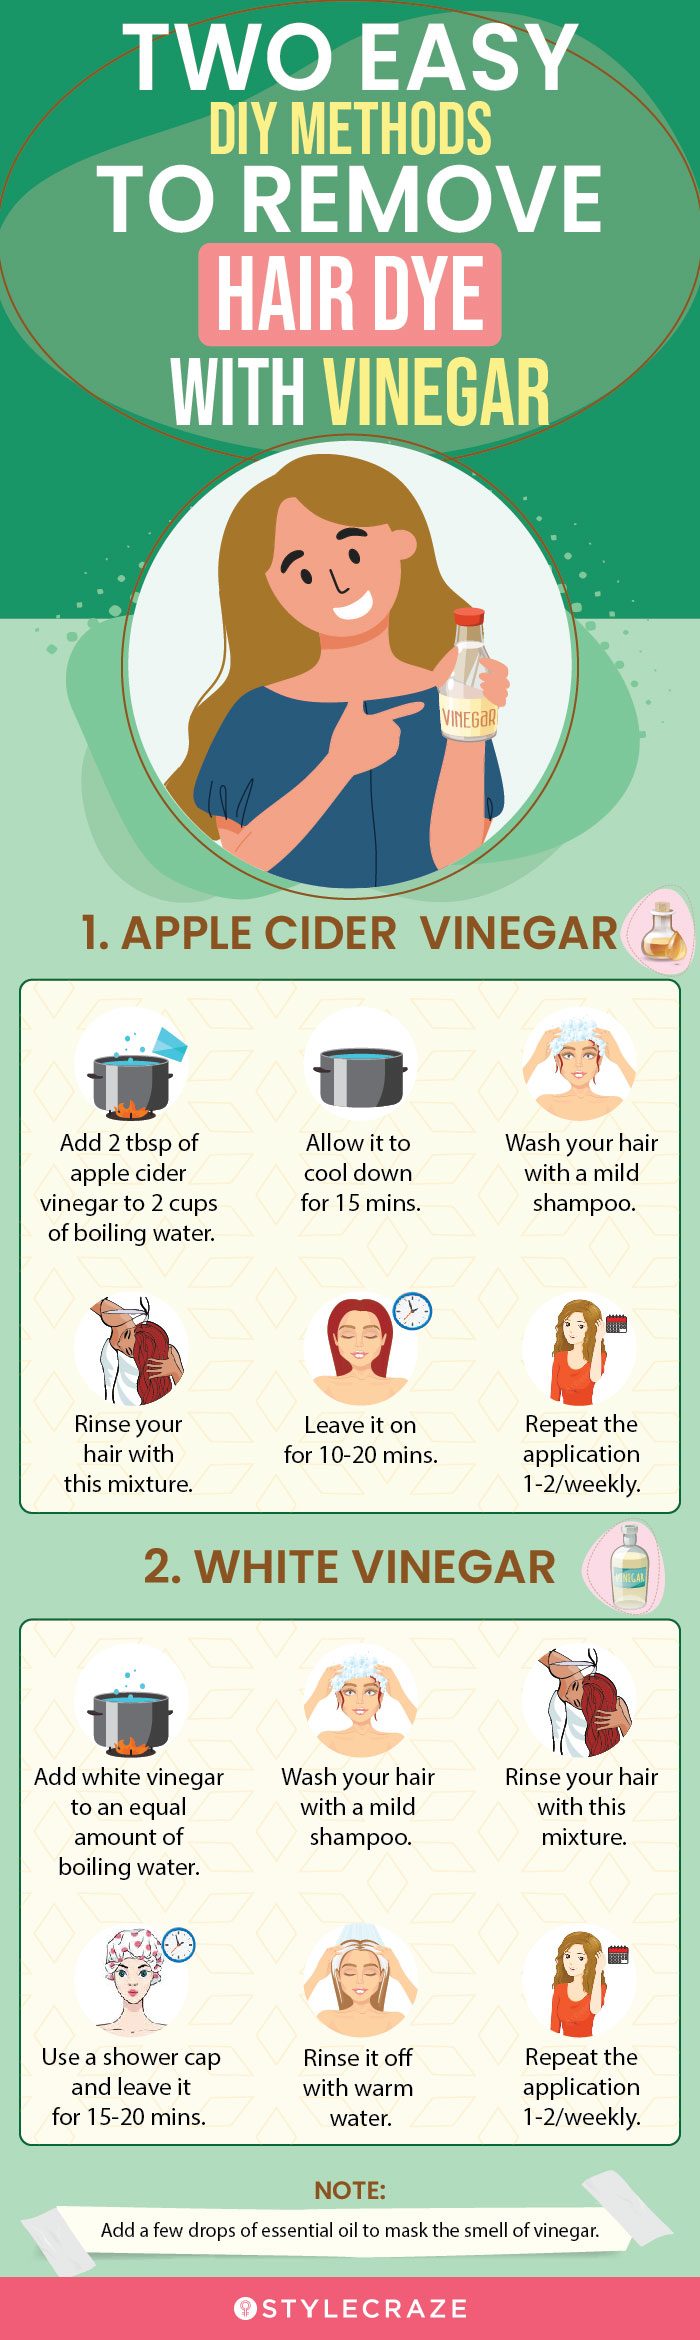 How To Use Vinegar To Remove Hair Dye Naturally